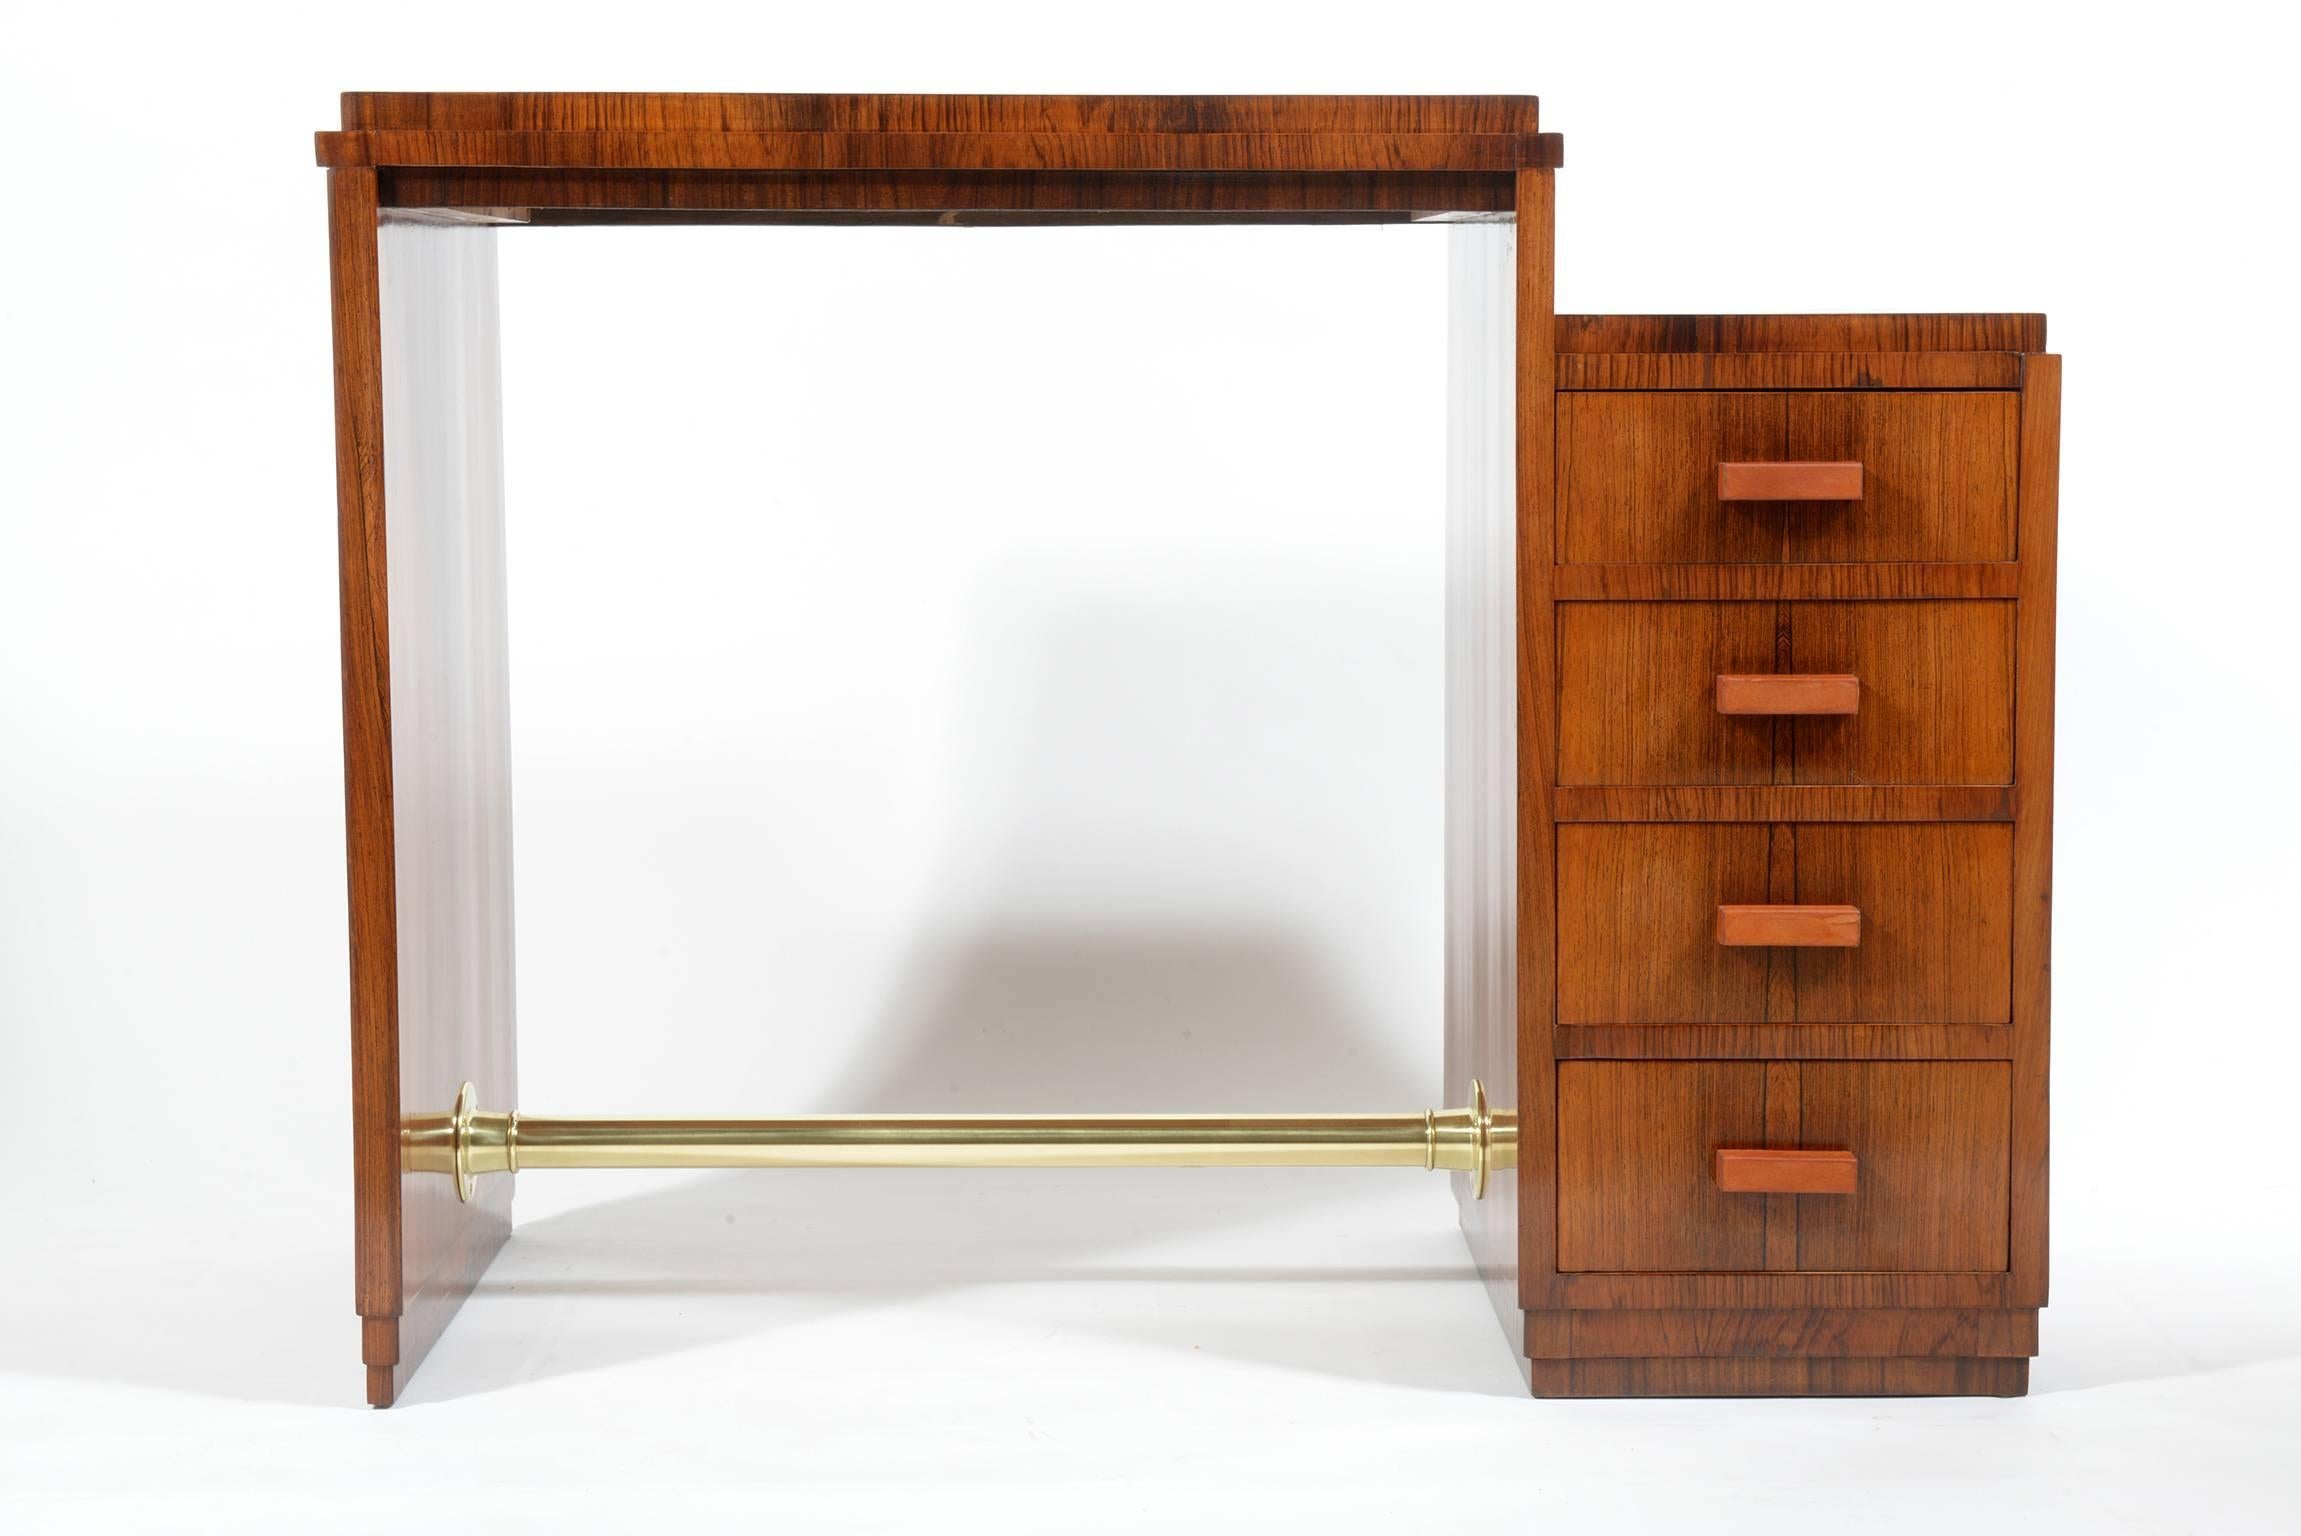 Rationalist little writing desk in exotic wood, four drawers with handles covered in natural leather.
Interesting decorative Art Deco details construction.
Brass footrest.